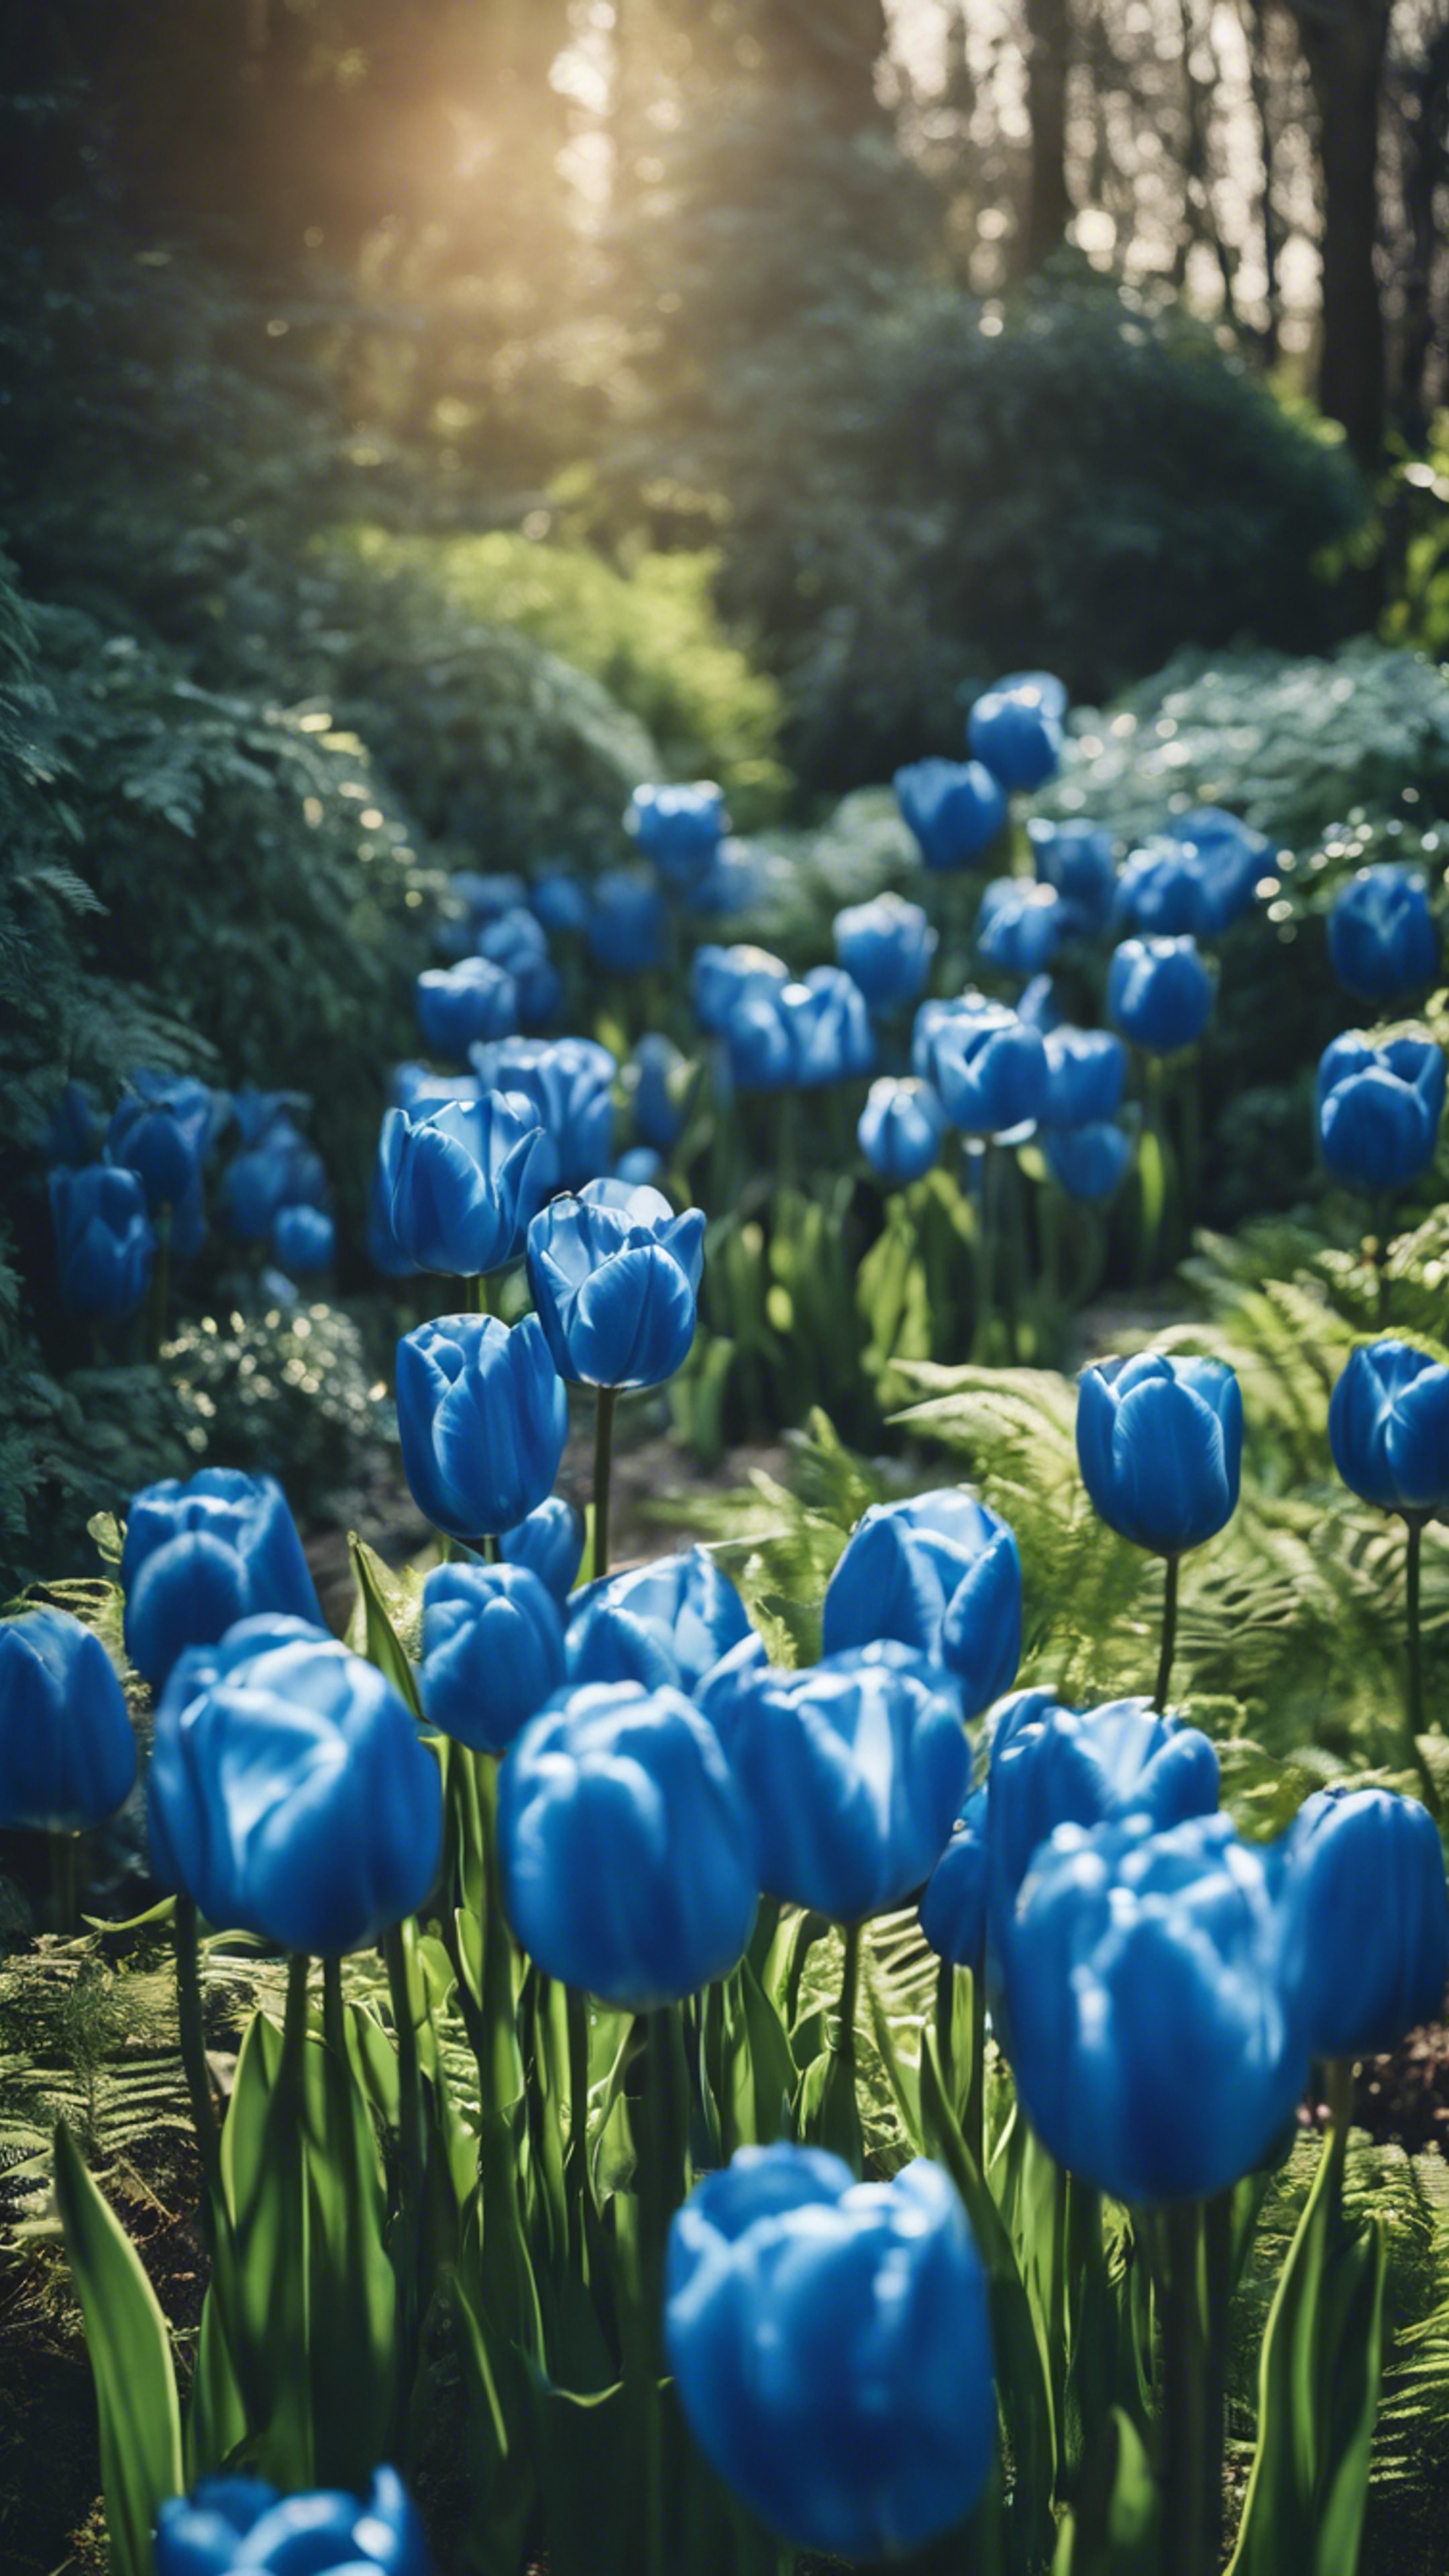 A vibrant illustration of blue tulips amidst ferns and ivy in a garden at the crack of dawn. Ταπετσαρία[e8b6b27cf94f4f81bdac]